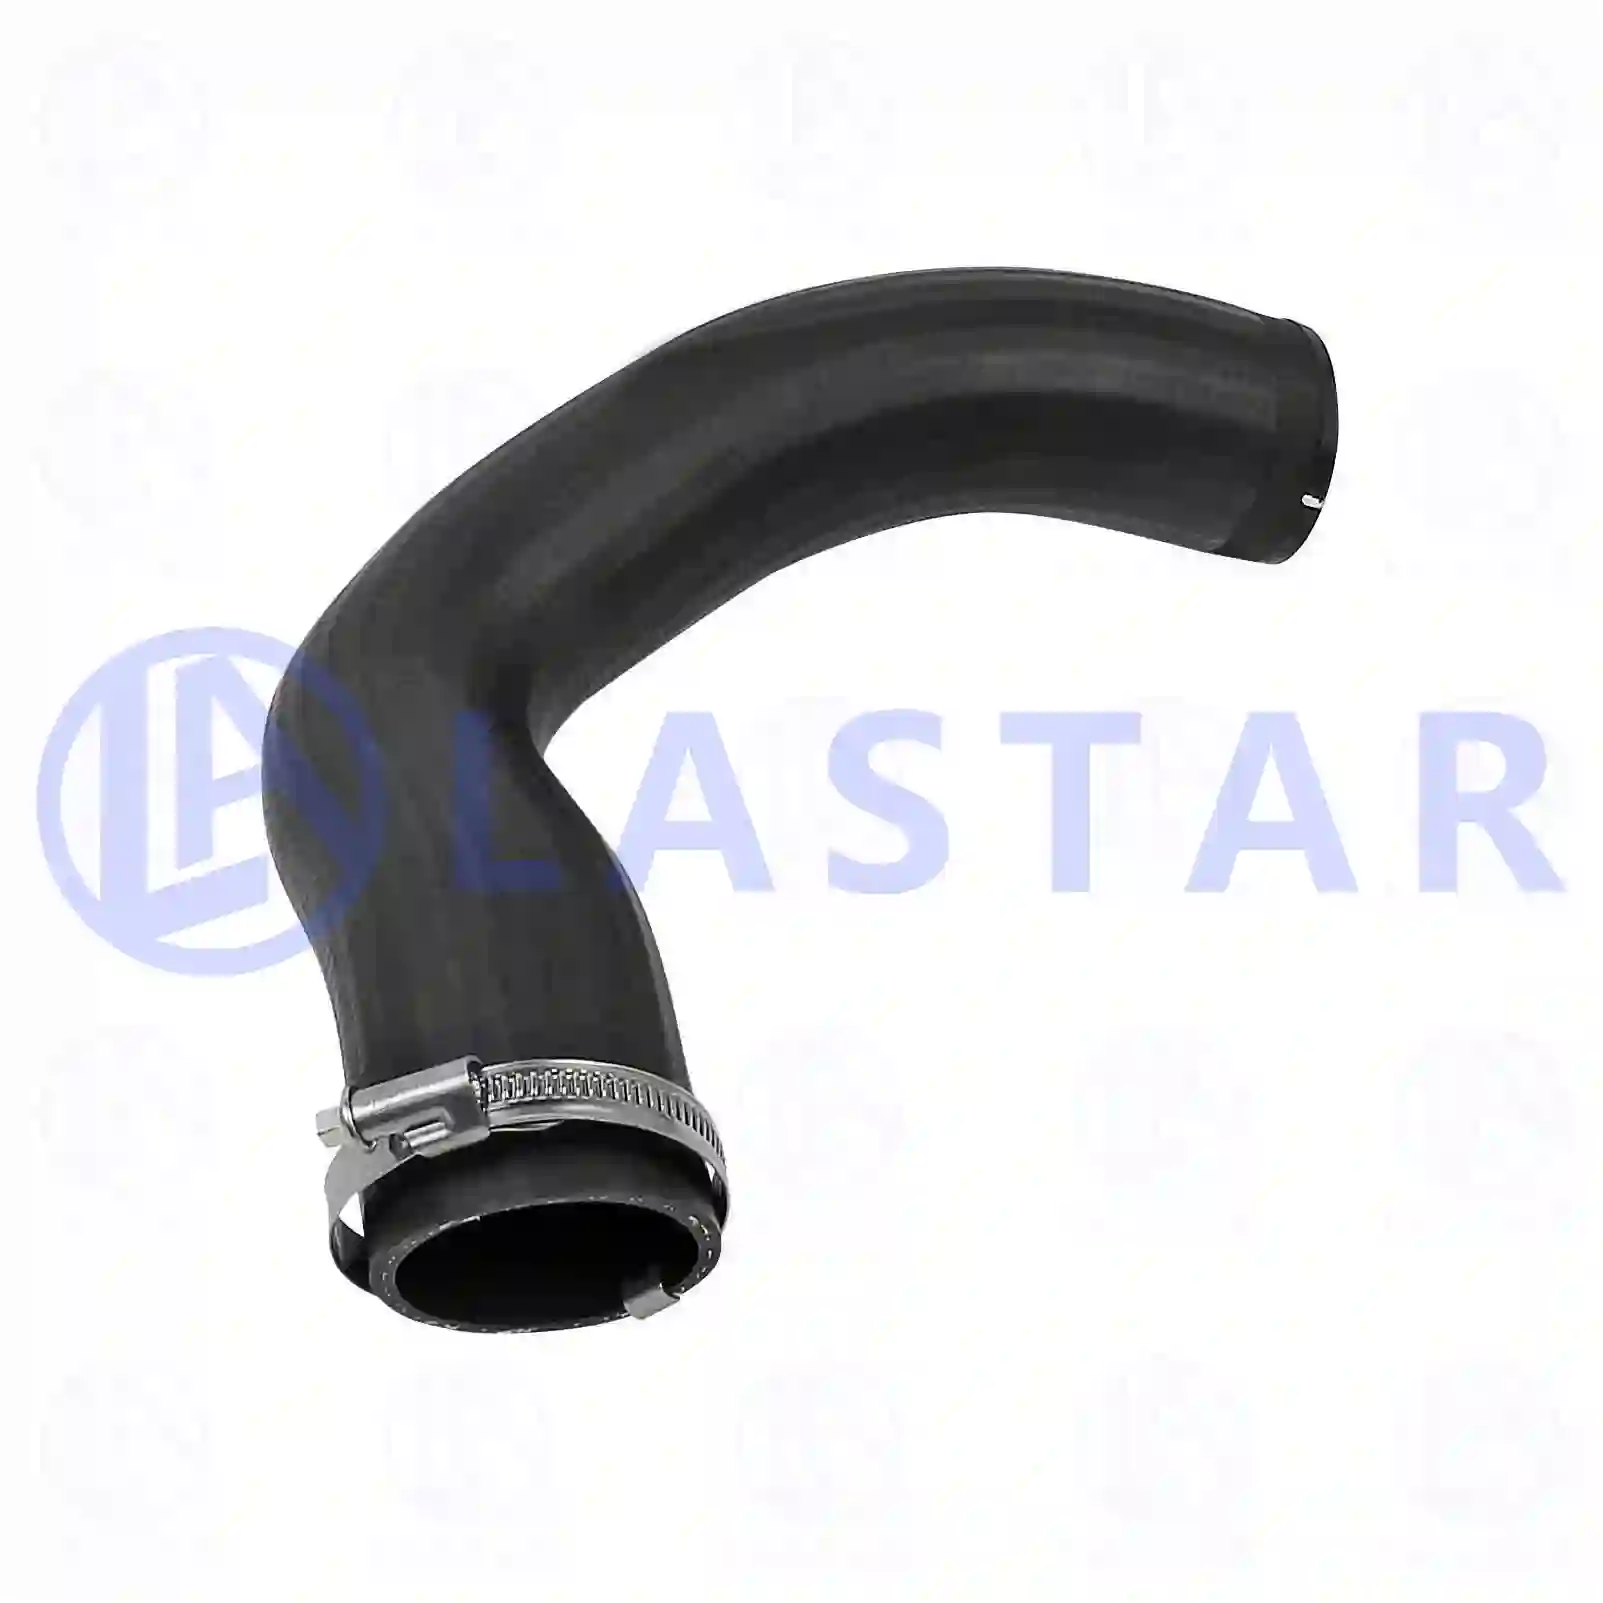 Charge air hose, 77708421, 9065281082, 9065283382, ZG00309-0008 ||  77708421 Lastar Spare Part | Truck Spare Parts, Auotomotive Spare Parts Charge air hose, 77708421, 9065281082, 9065283382, ZG00309-0008 ||  77708421 Lastar Spare Part | Truck Spare Parts, Auotomotive Spare Parts